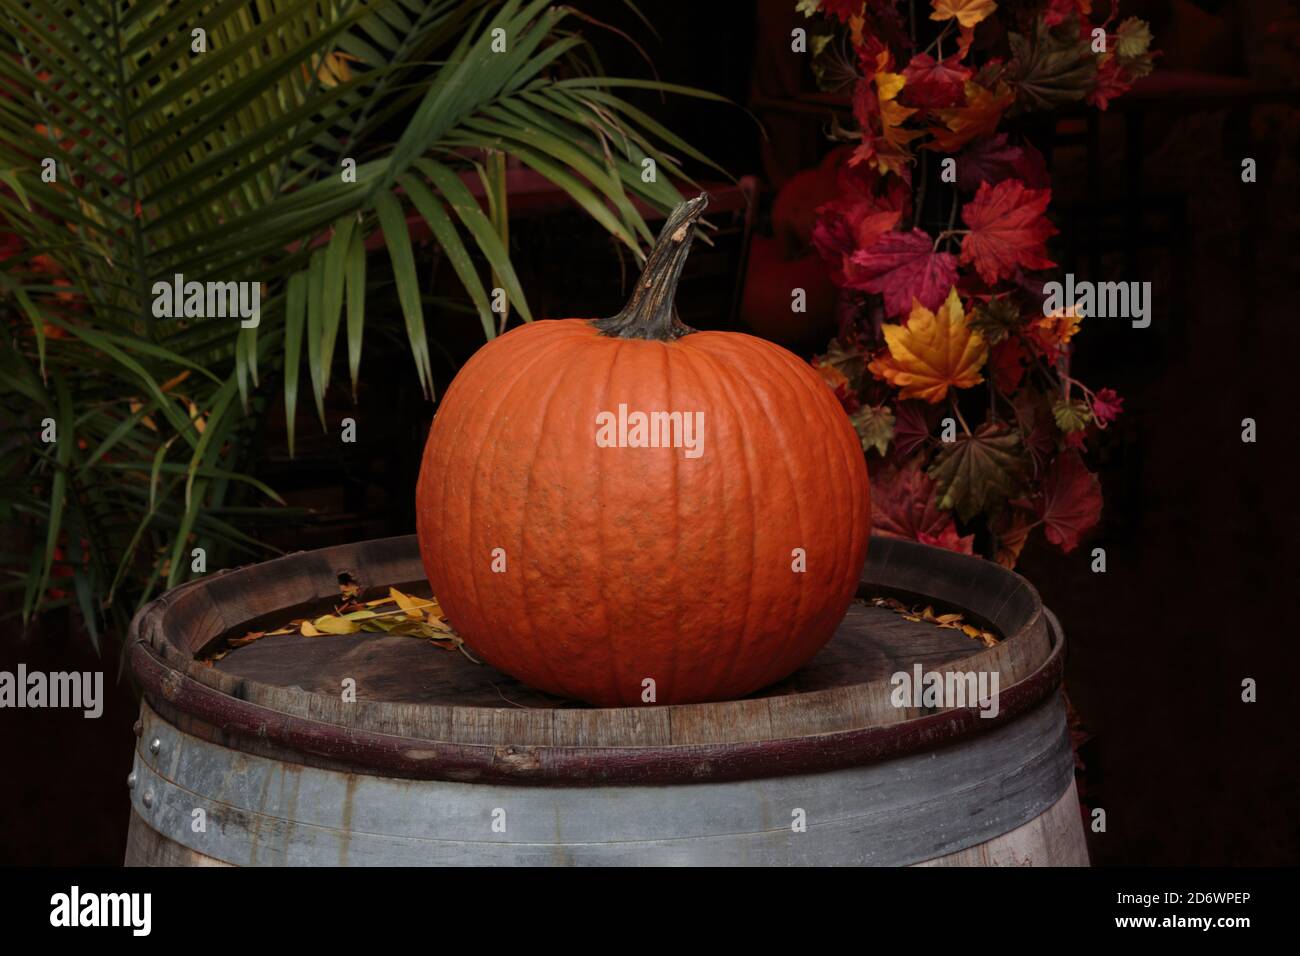 orange pumpkin on top of a barrel with autumn colored leaves backdrop for a Halloween, Fall or Autumn theme Stock Photo